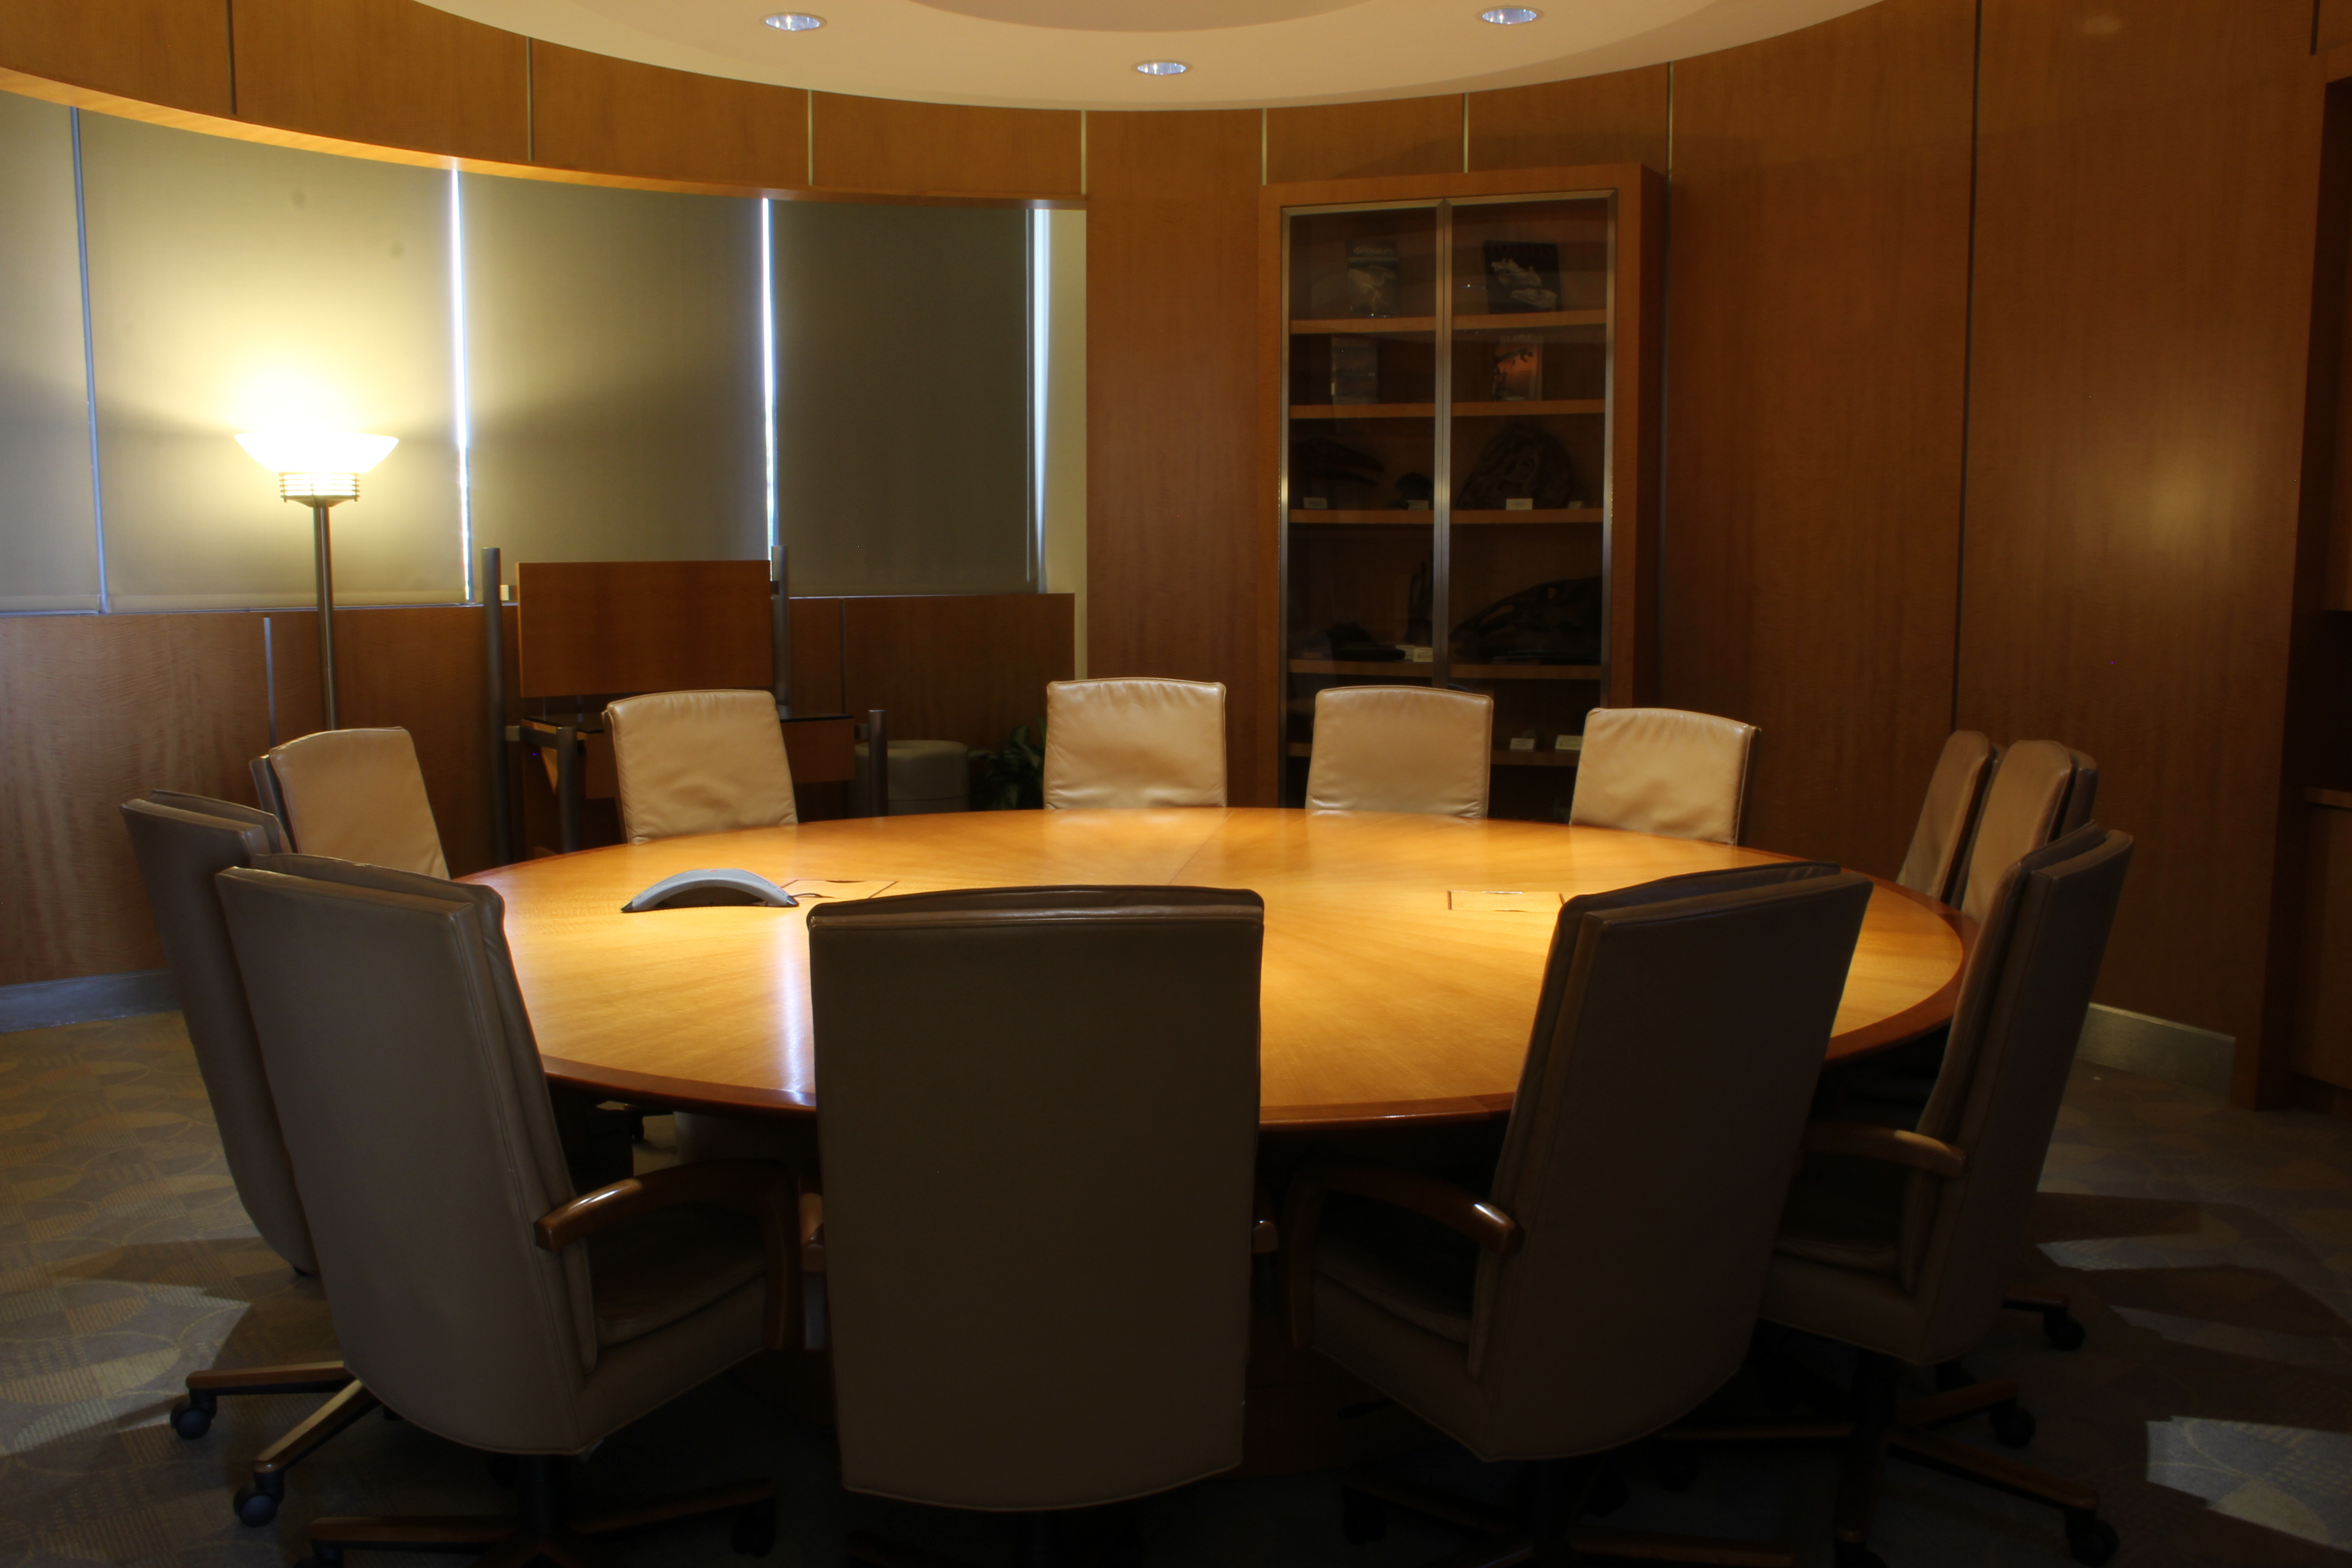 Image of the Board Room